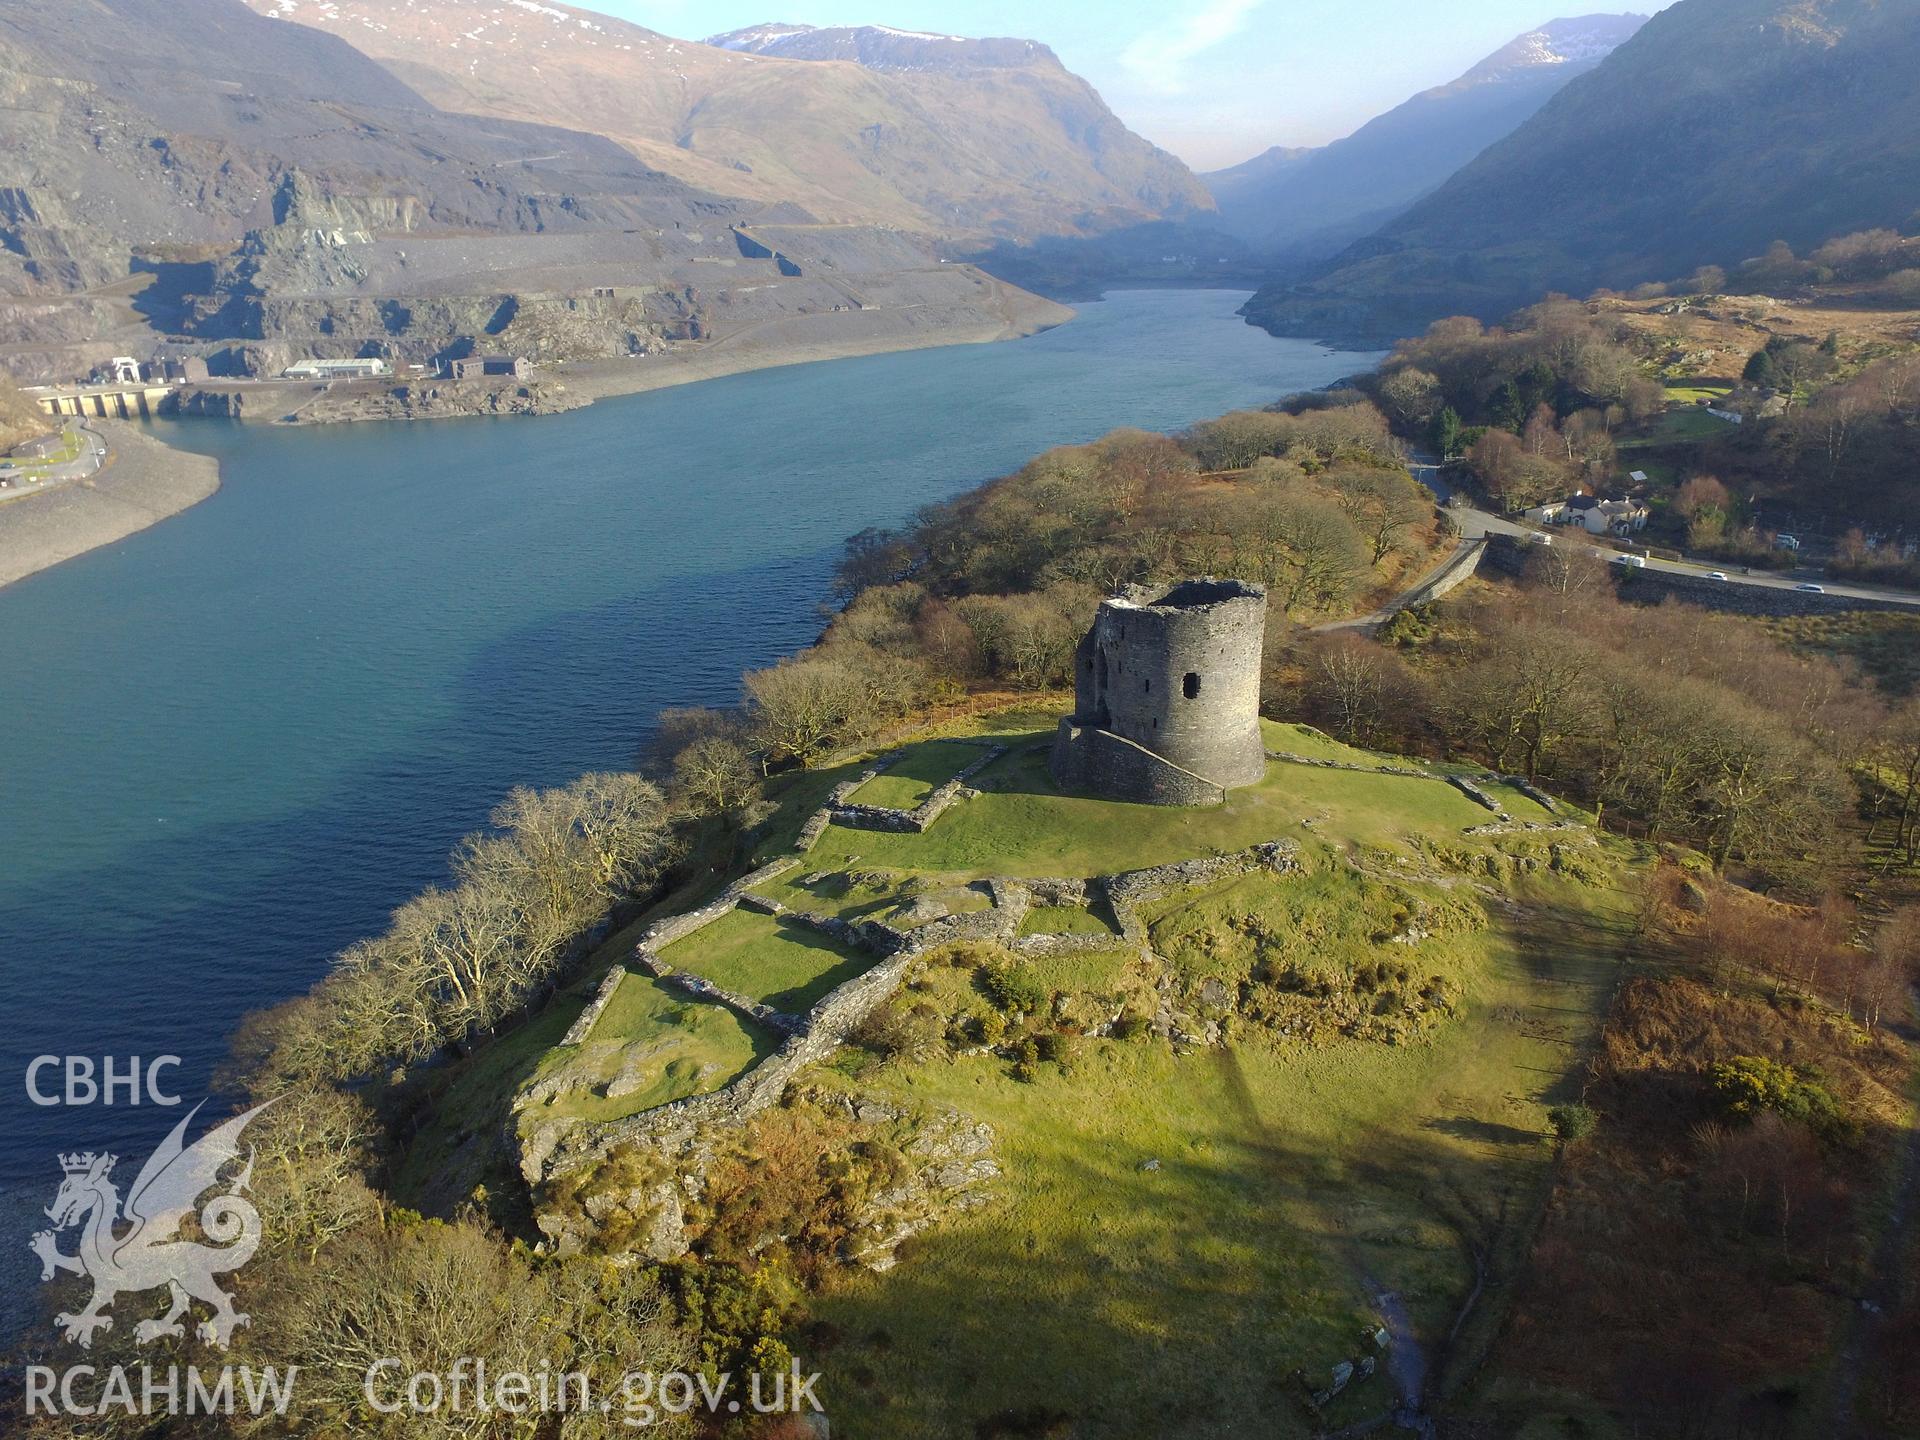 Colour photo showing aerial view of Dolbadarn Castle, Llanberis, taken by Paul R. Davis, 24th February 2018.